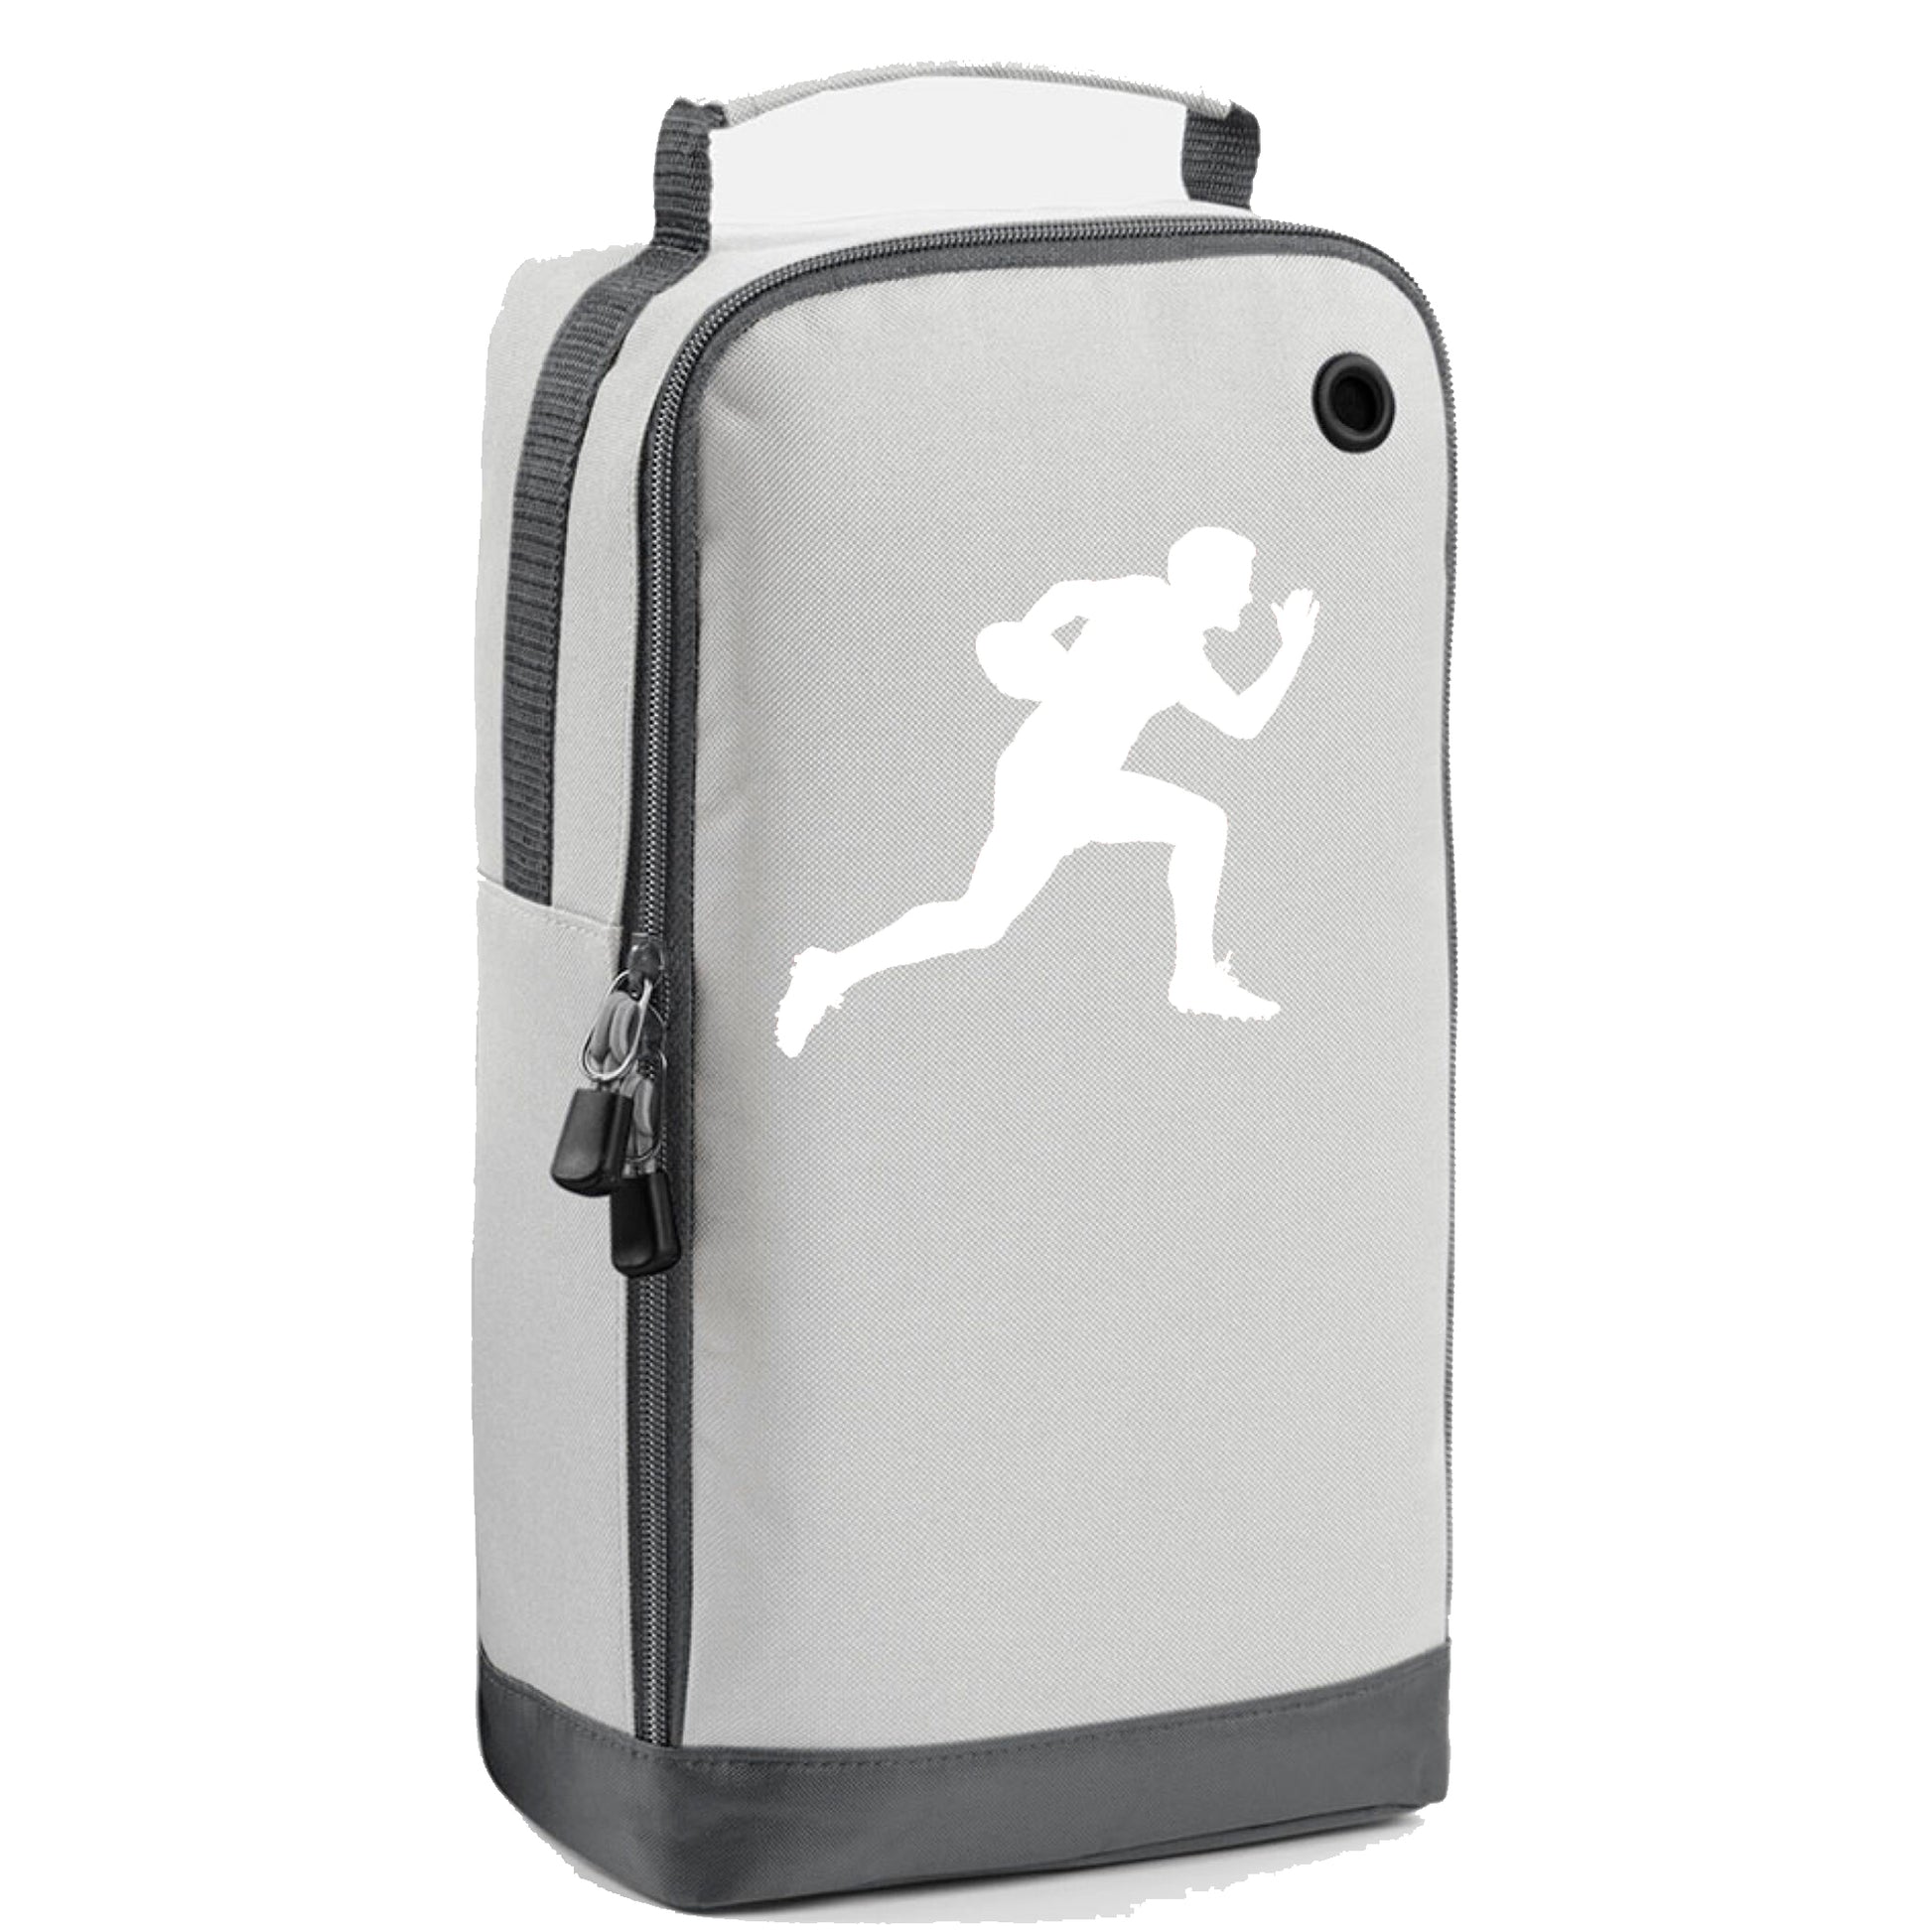 Personalised Rugby/ American Football Boot Bag with Design & Name  - Always Looking Good - Ice Silver  